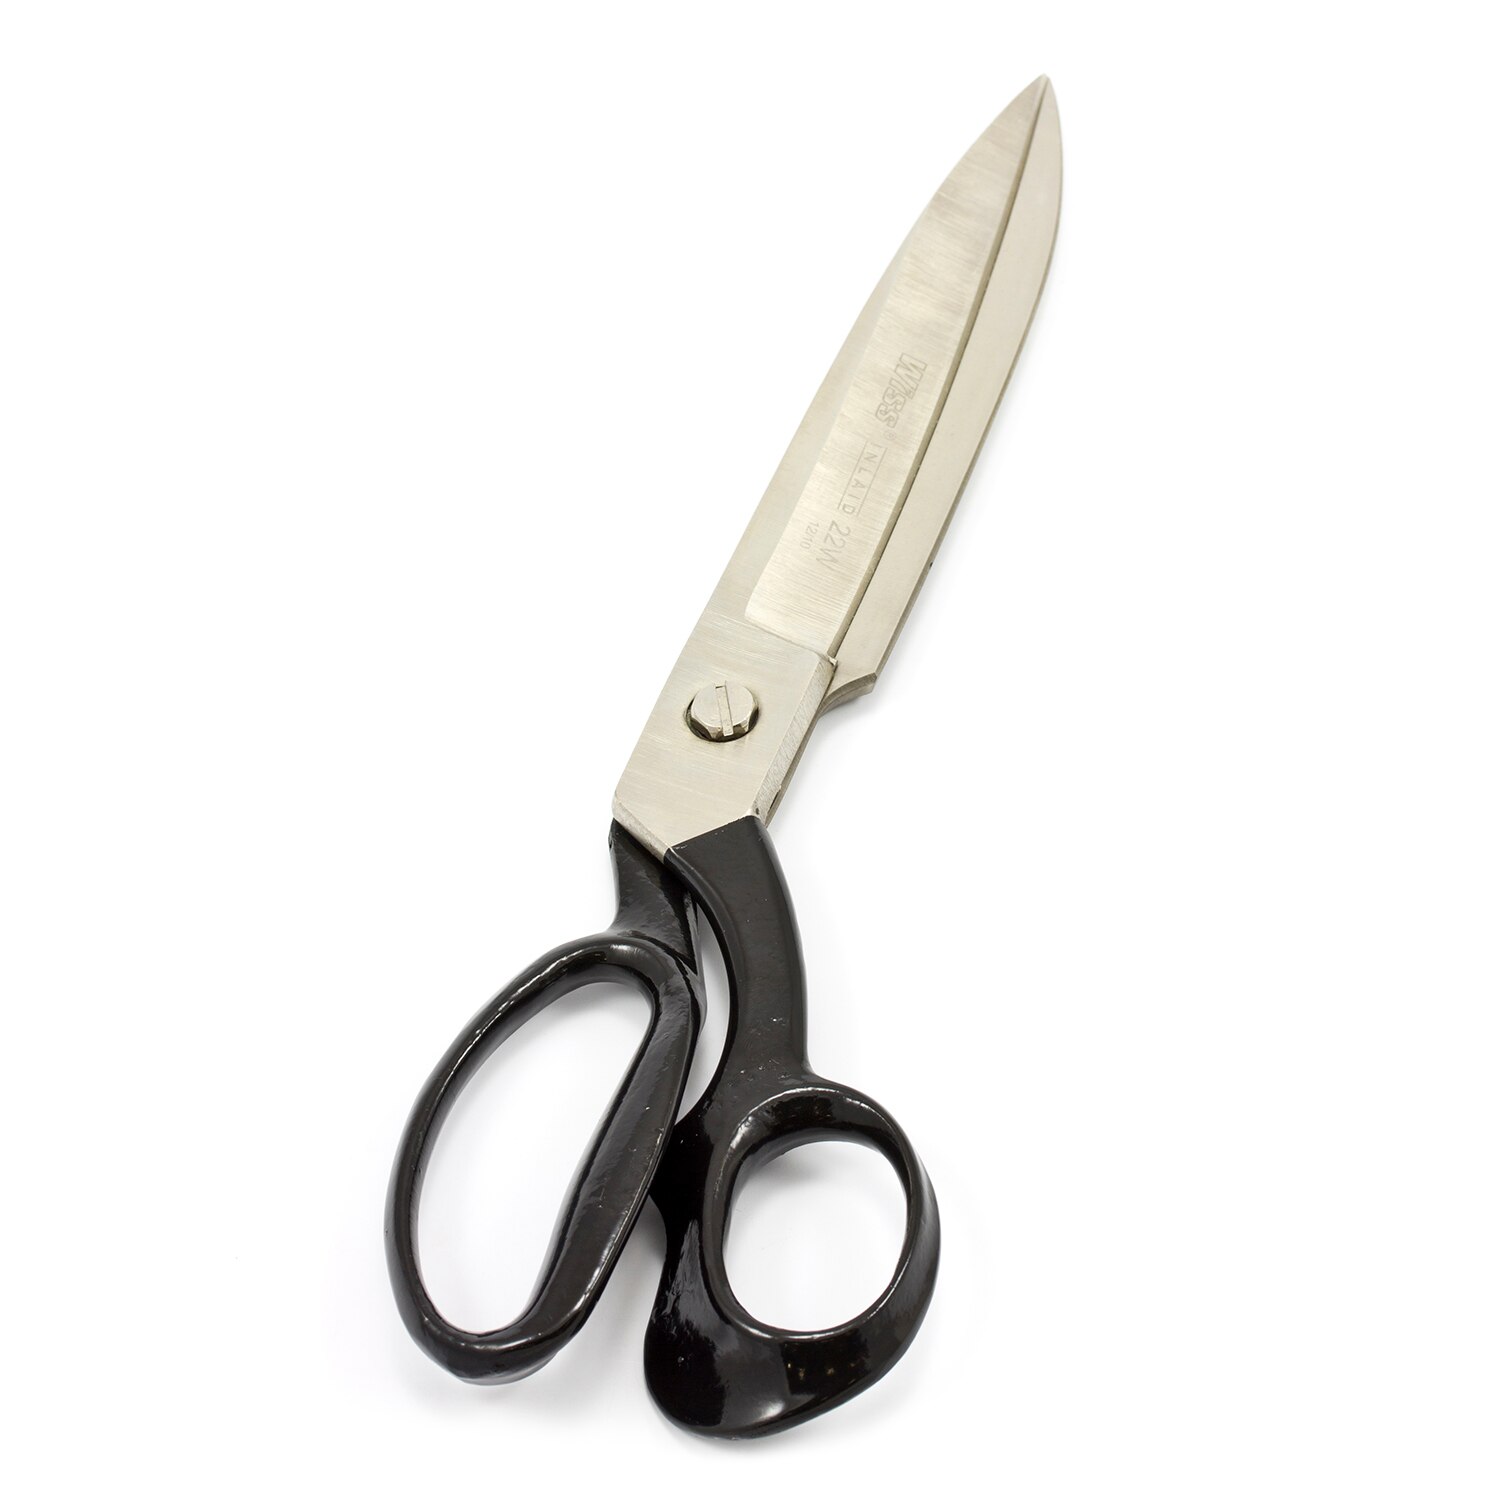 Buy Wiss® Knife Edge Upholstery, Carpet and Fabric Shears #1226 12-1/4 inch